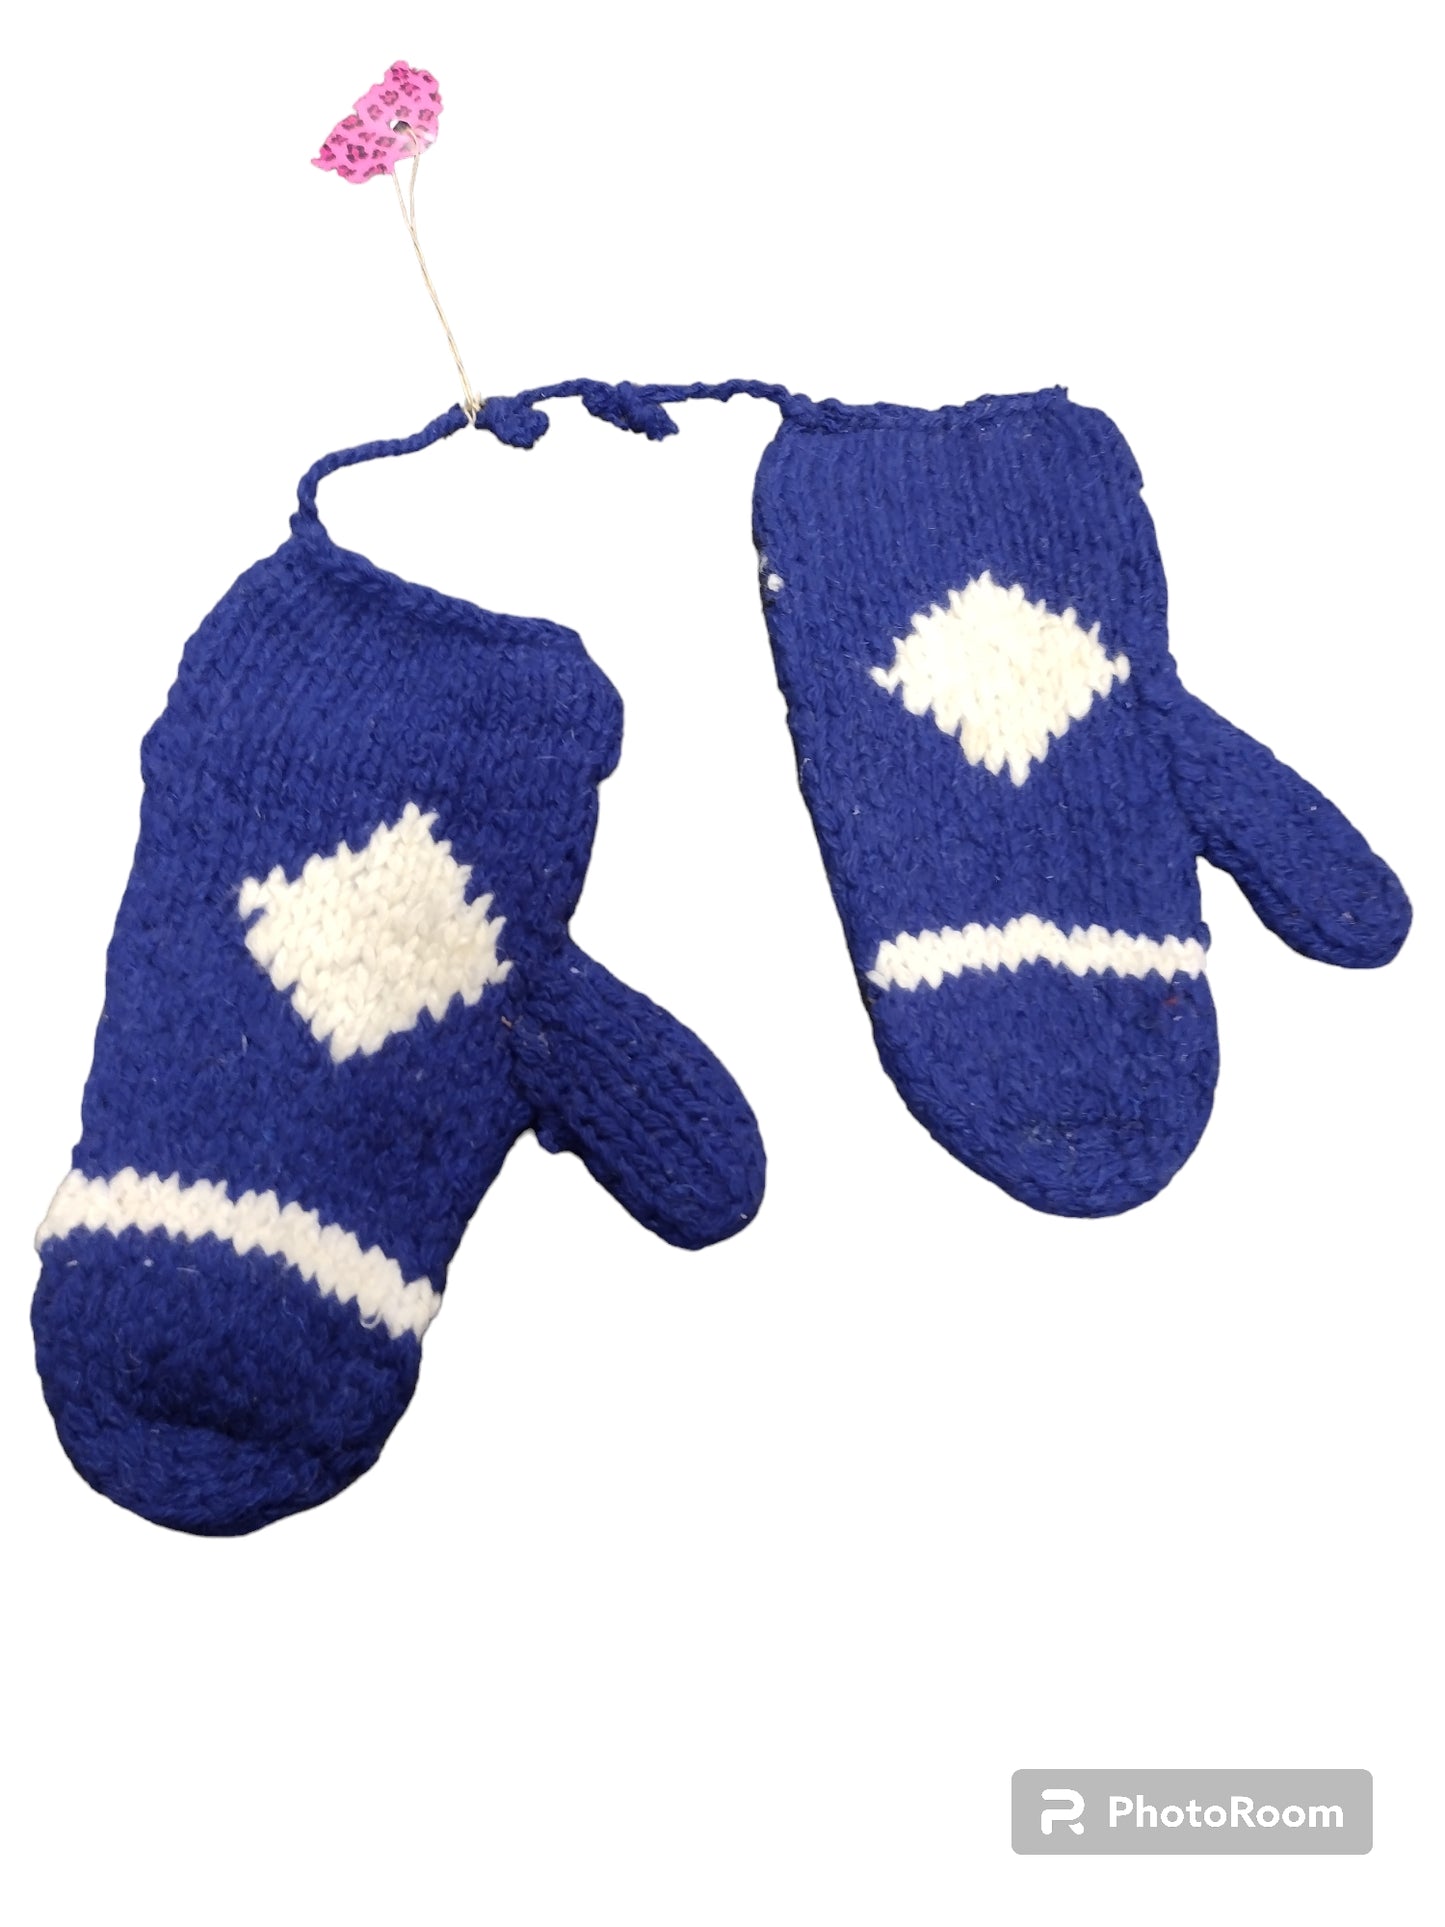 Wool Mittens (Adult Size)